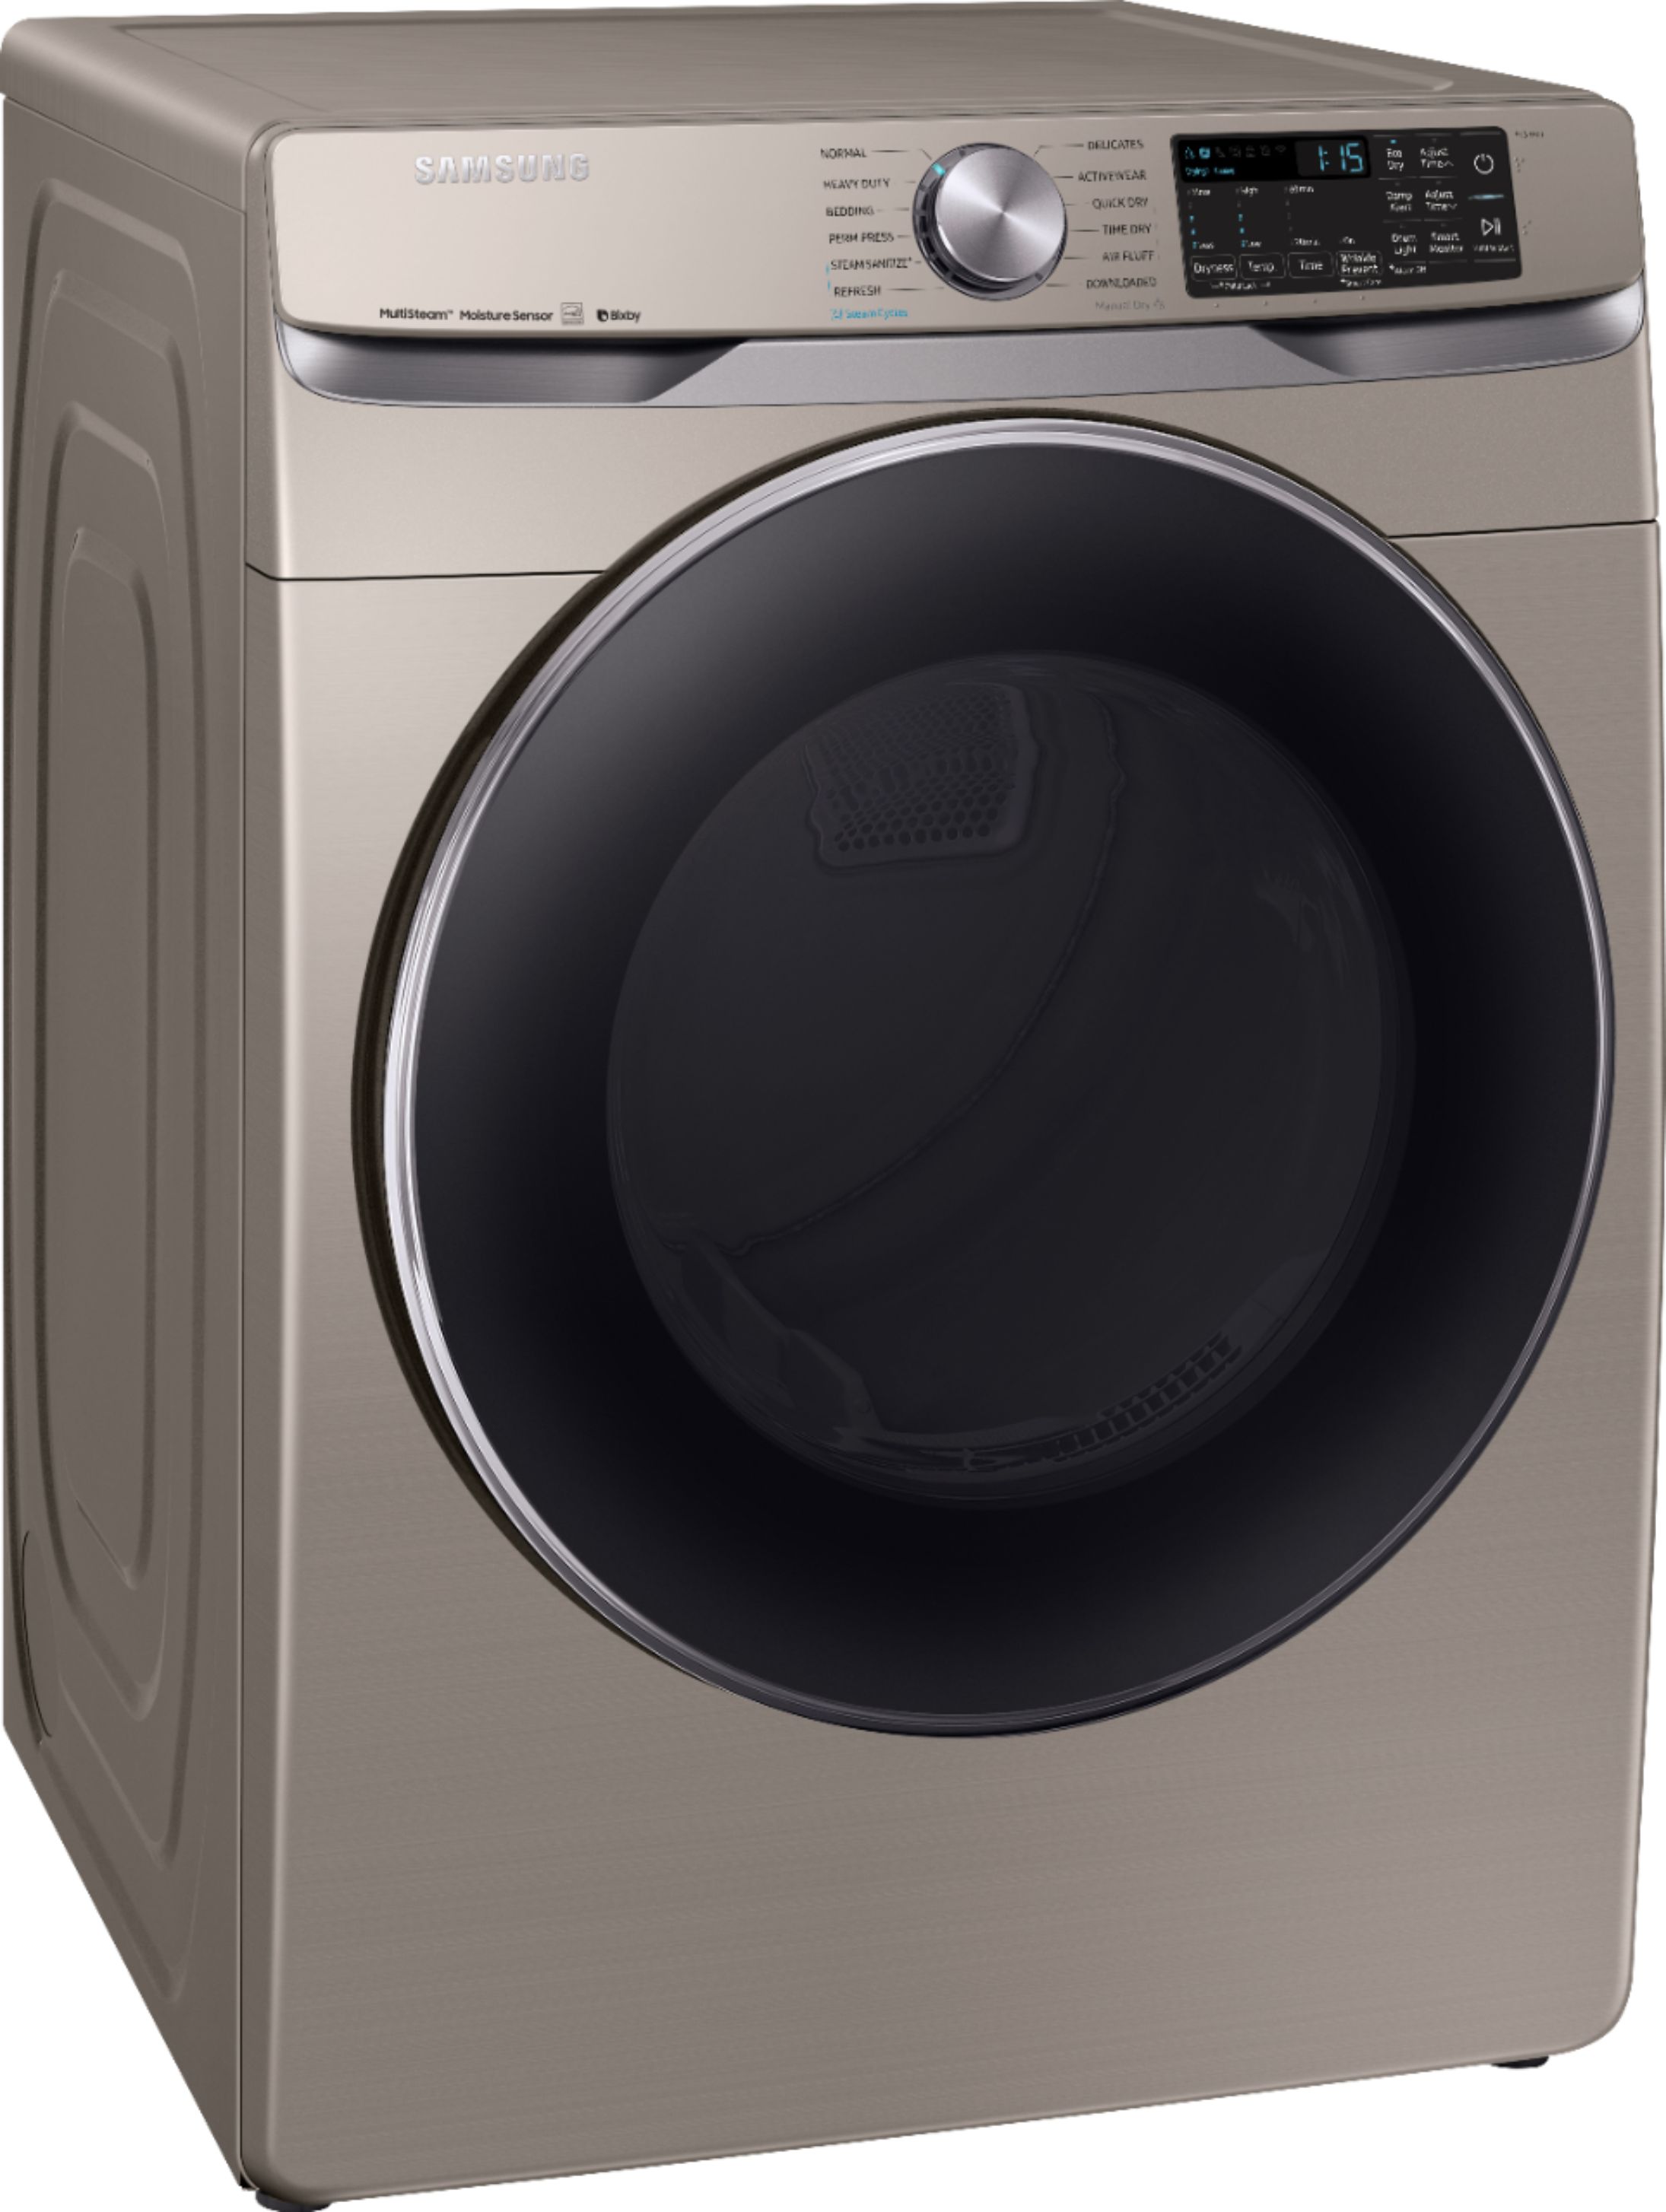 Angle View: Samsung - 7.5 Cu. Ft. Stackable Smart Electric Dryer with Steam Sanitize+ and Sensor Dry - Champagne